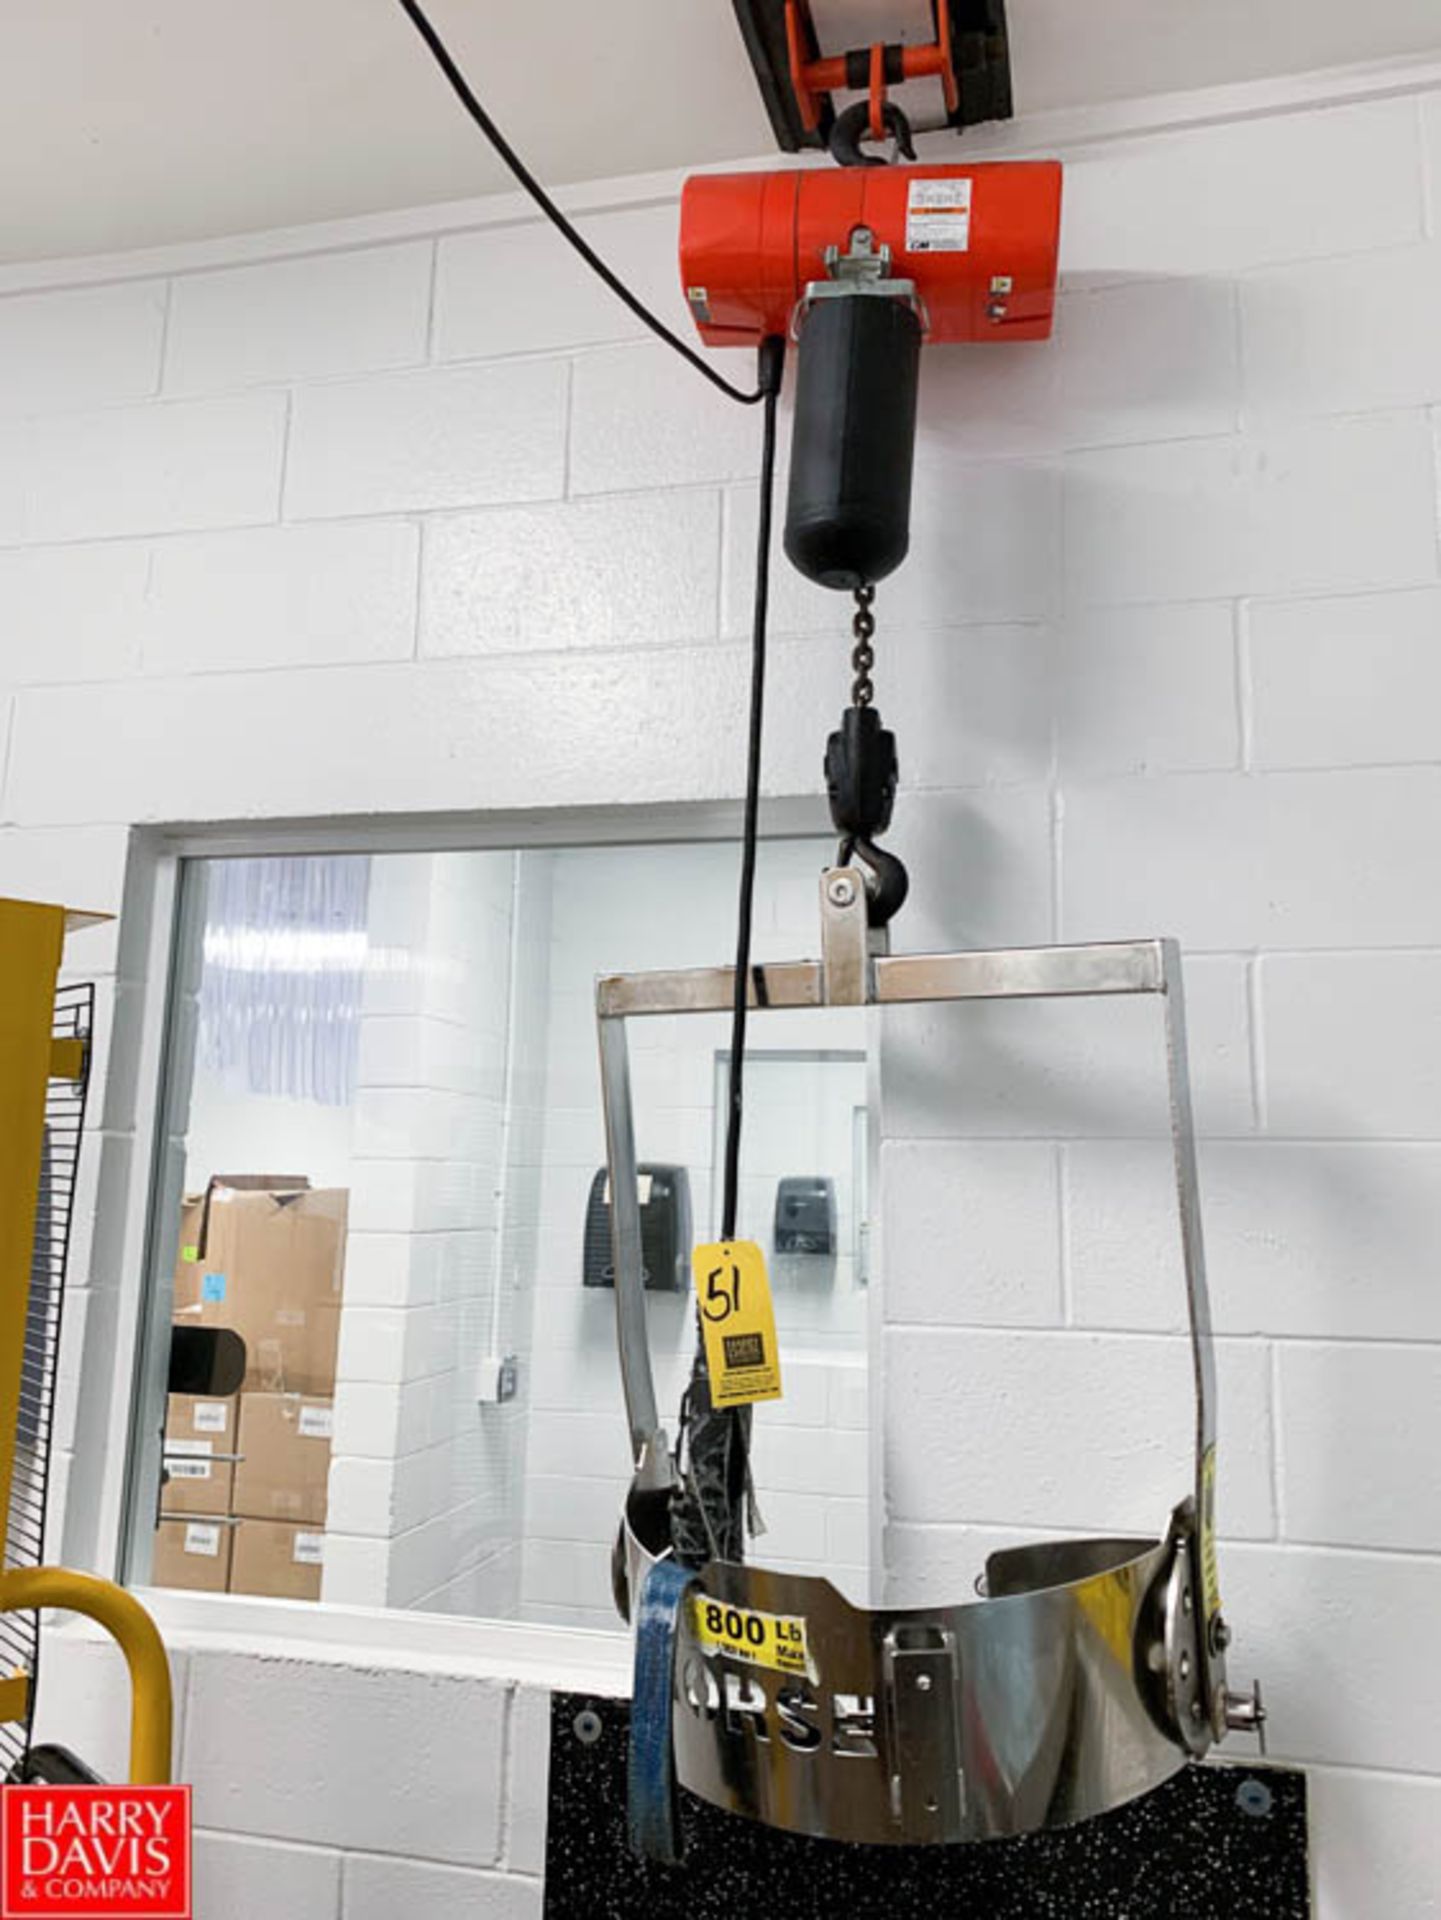 CM Valuestar 1 Ton Electric Chain Hoist with Mores 800 LB Capacity S/S Barrel Lifter Rigging Prices: